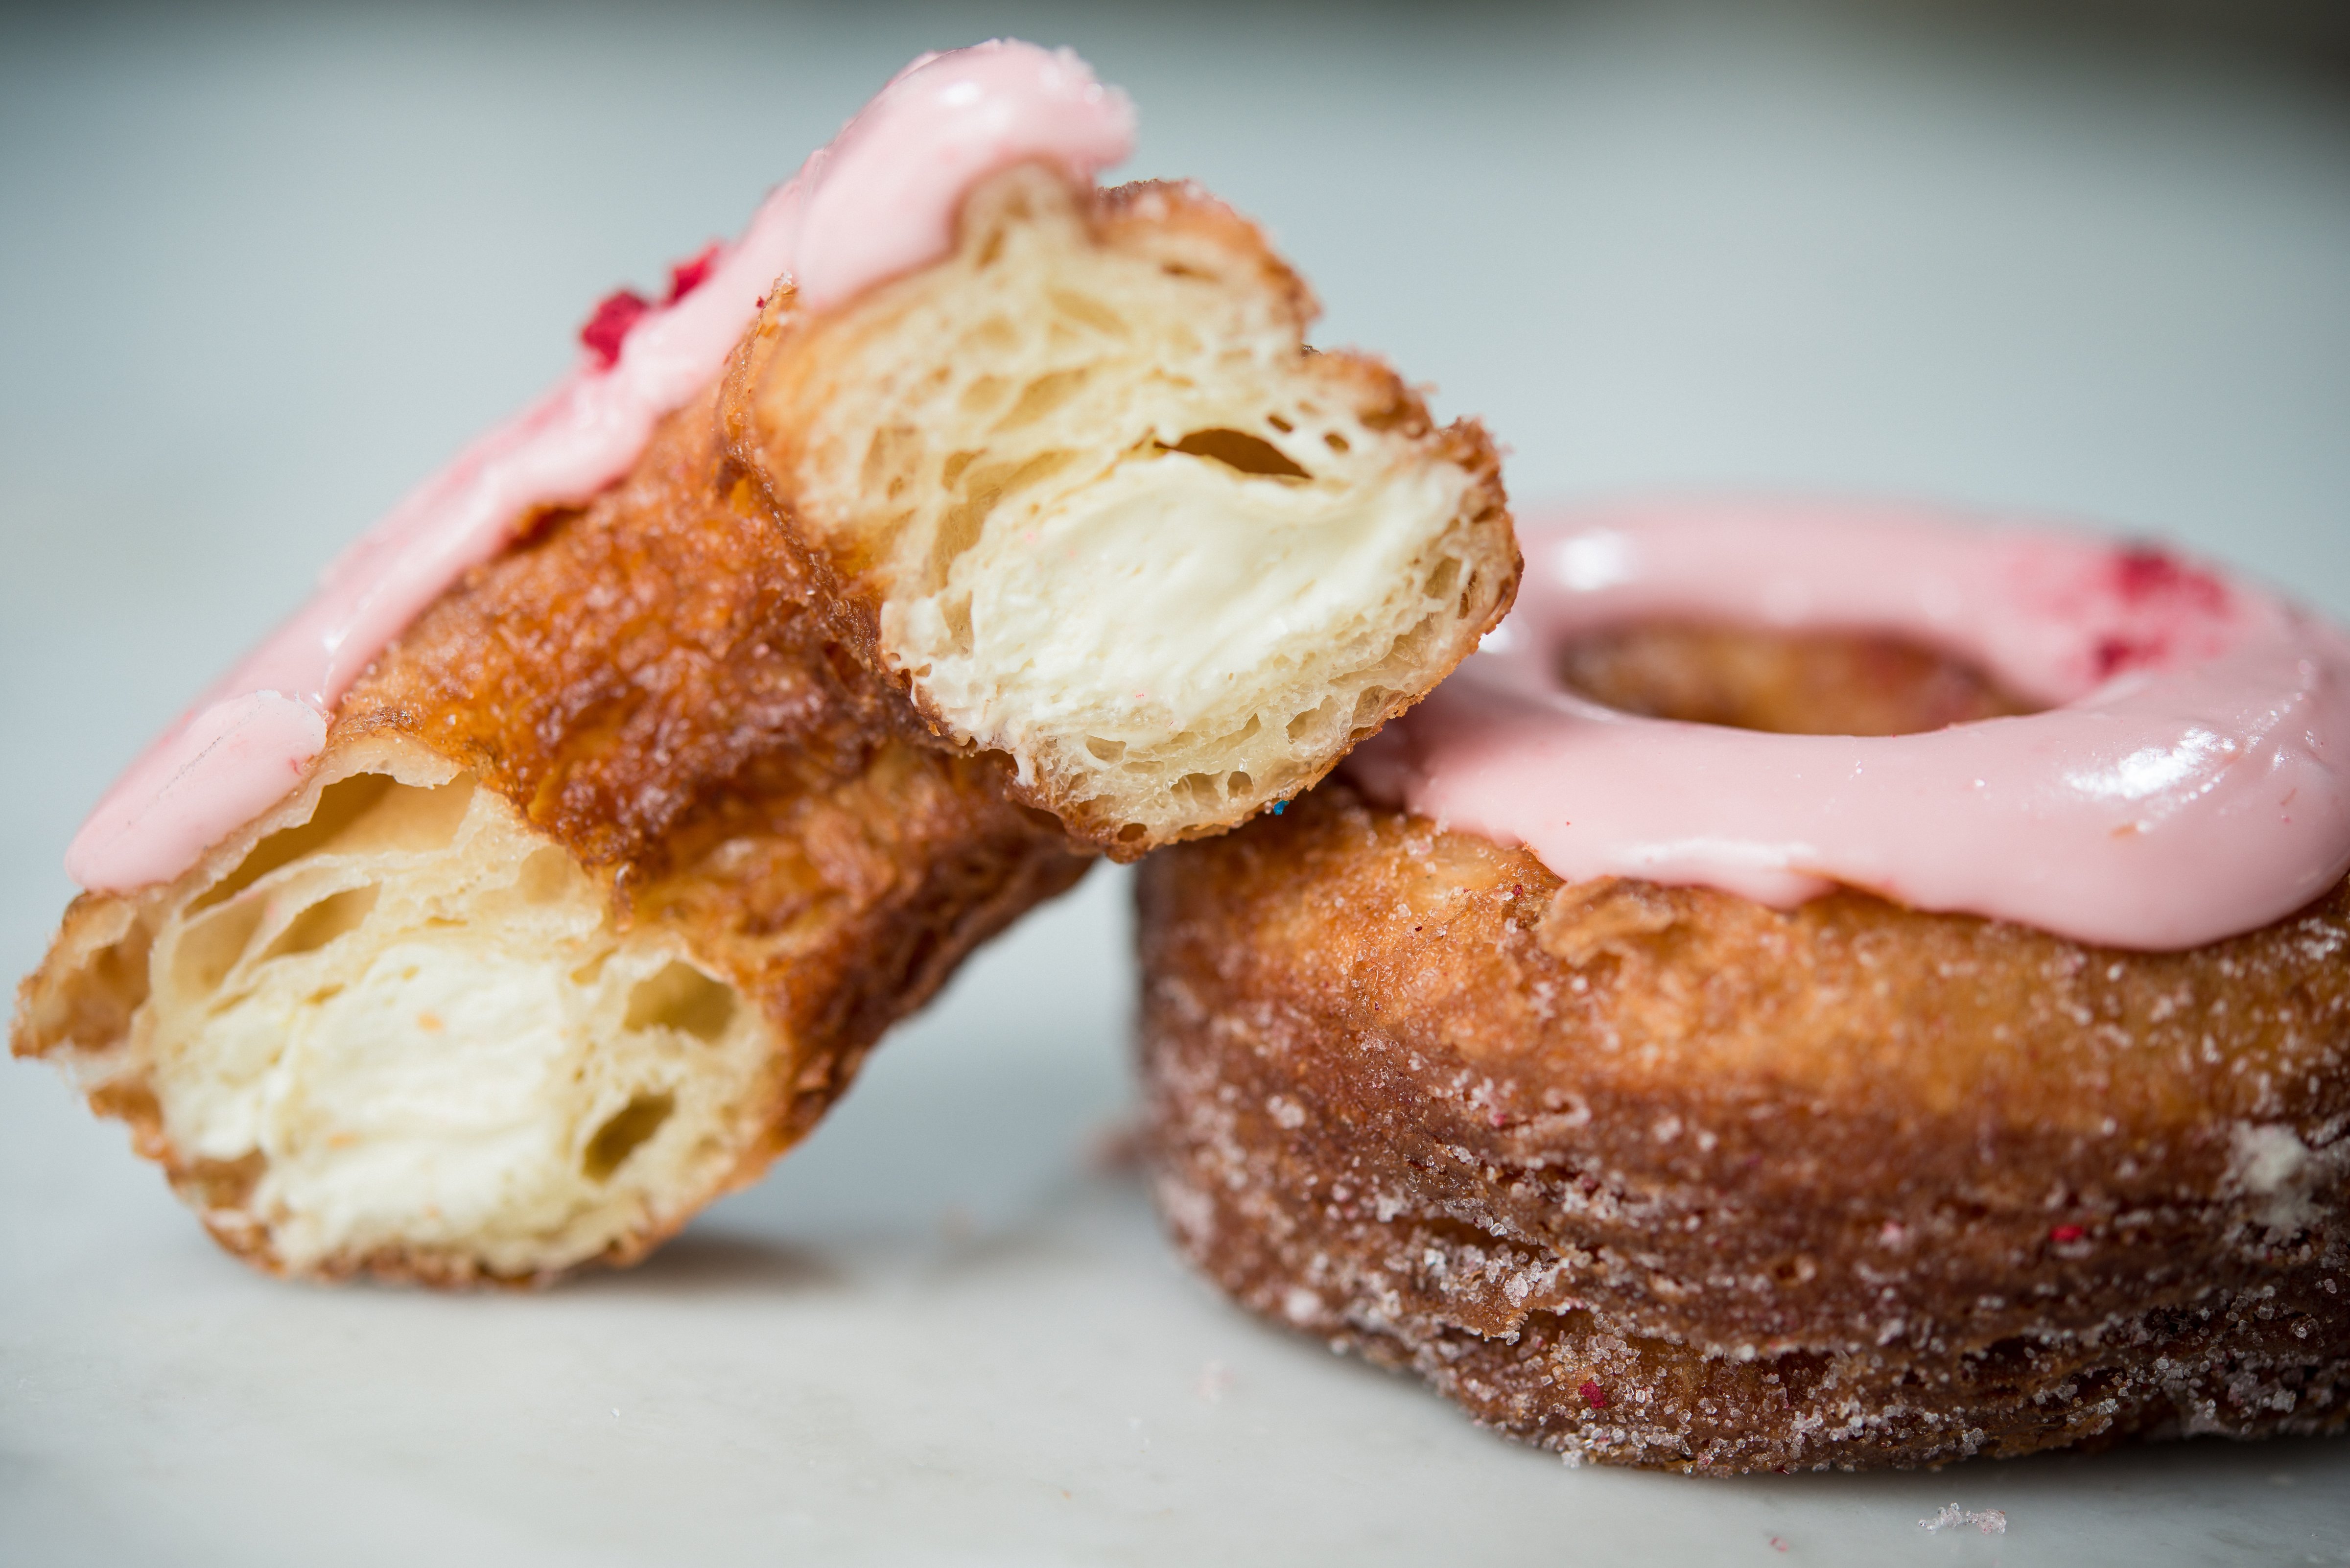 Rasberry Lychee Cronut by Dominique Ansel Bakery in New York City (Andre Maier LLC&mdash;Getty Images)